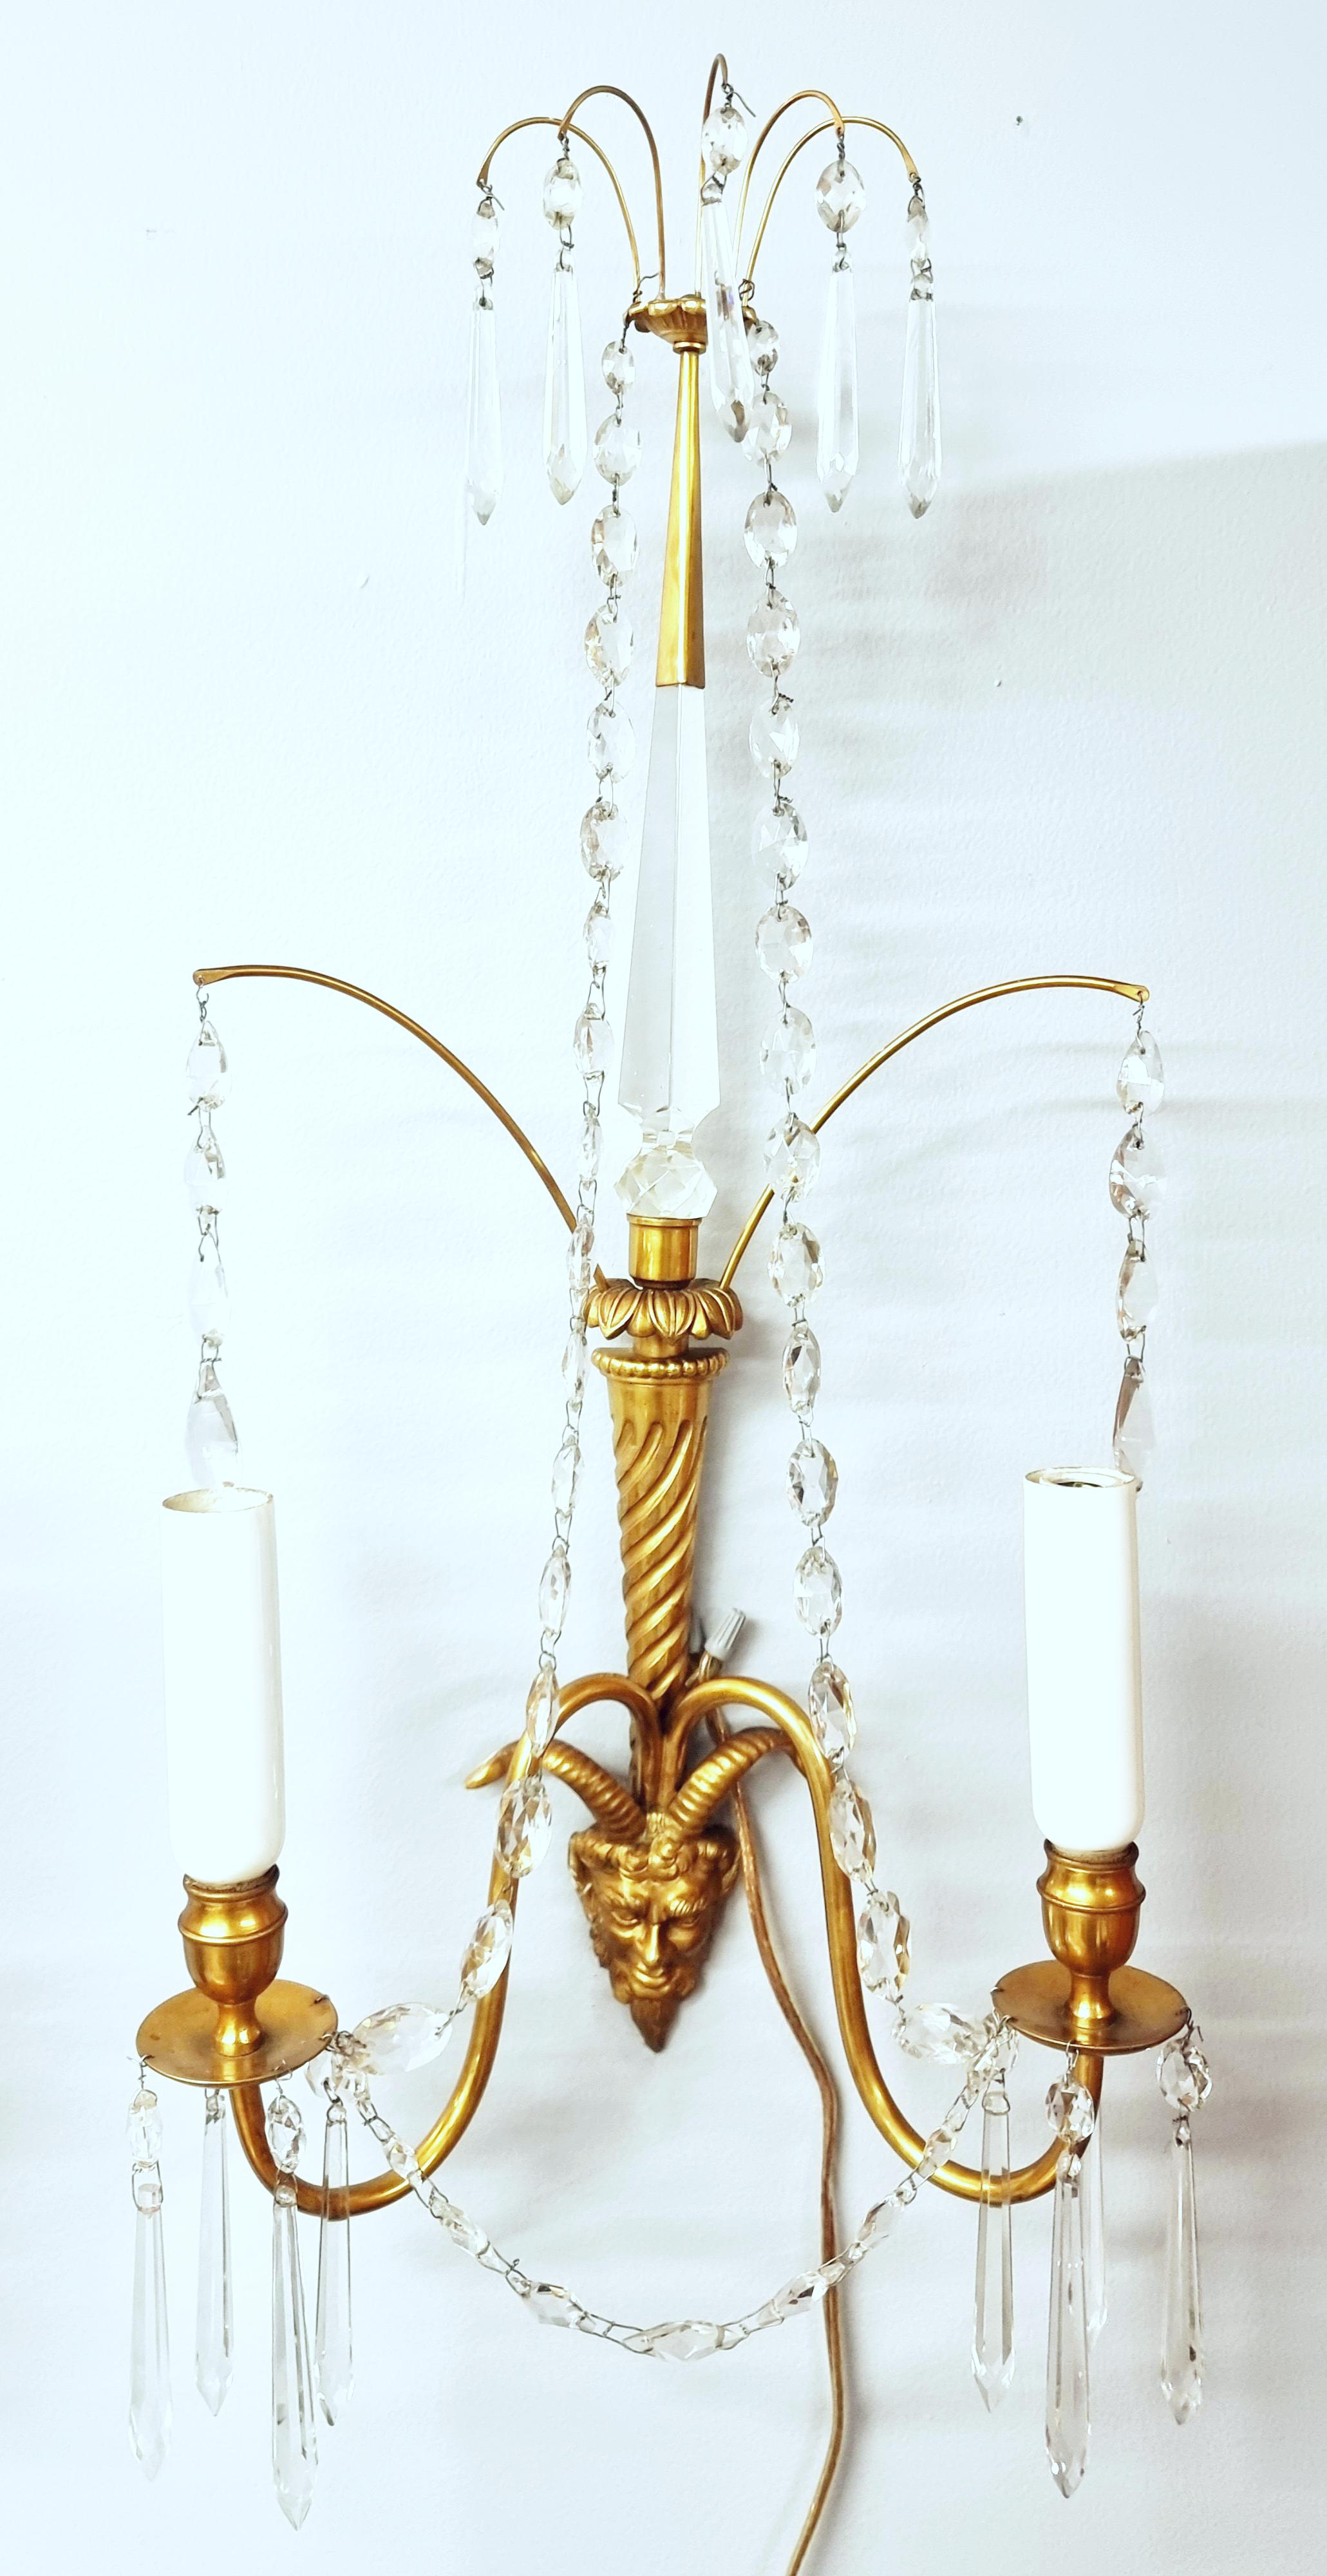 Pair of Baltic Gilt Satyr Faun Head Wall Sconces, Late 19th / Early 20th Century For Sale 6